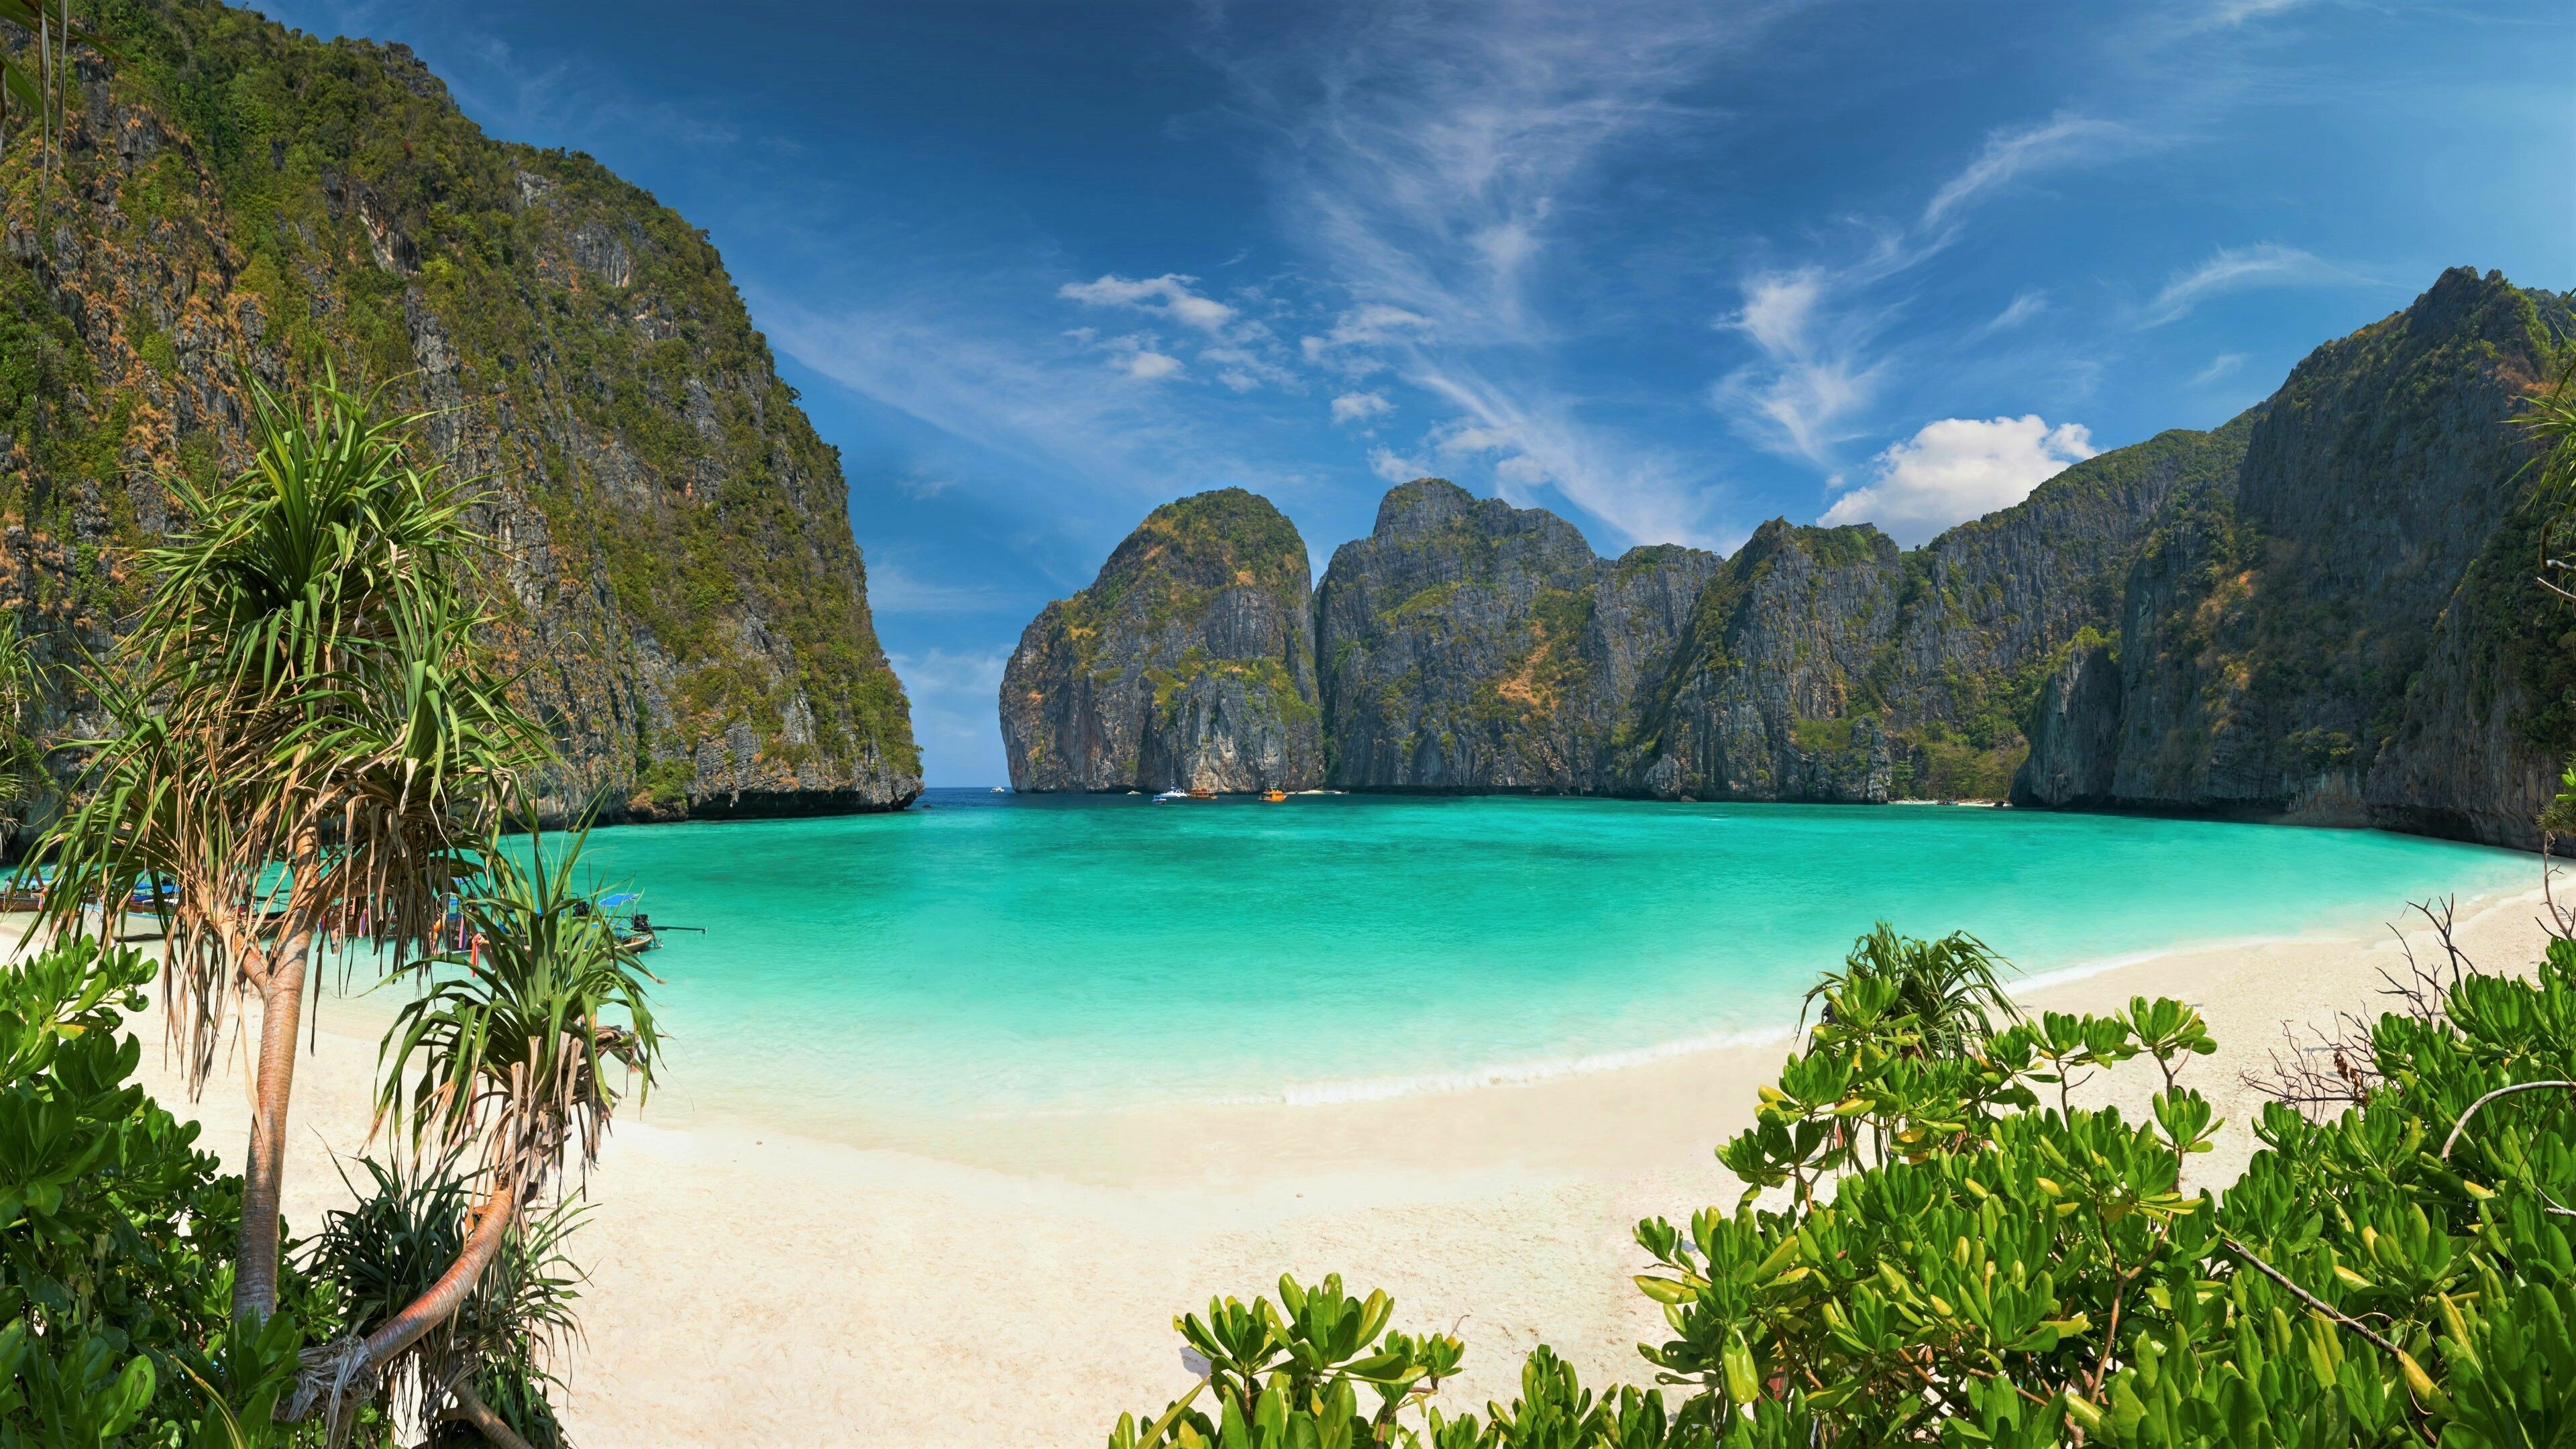 Phi Phi: An island group in Thailand between the large island of Phuket and the Straits of Malacca coast of Thailand. 3840x2160 4K Wallpaper.